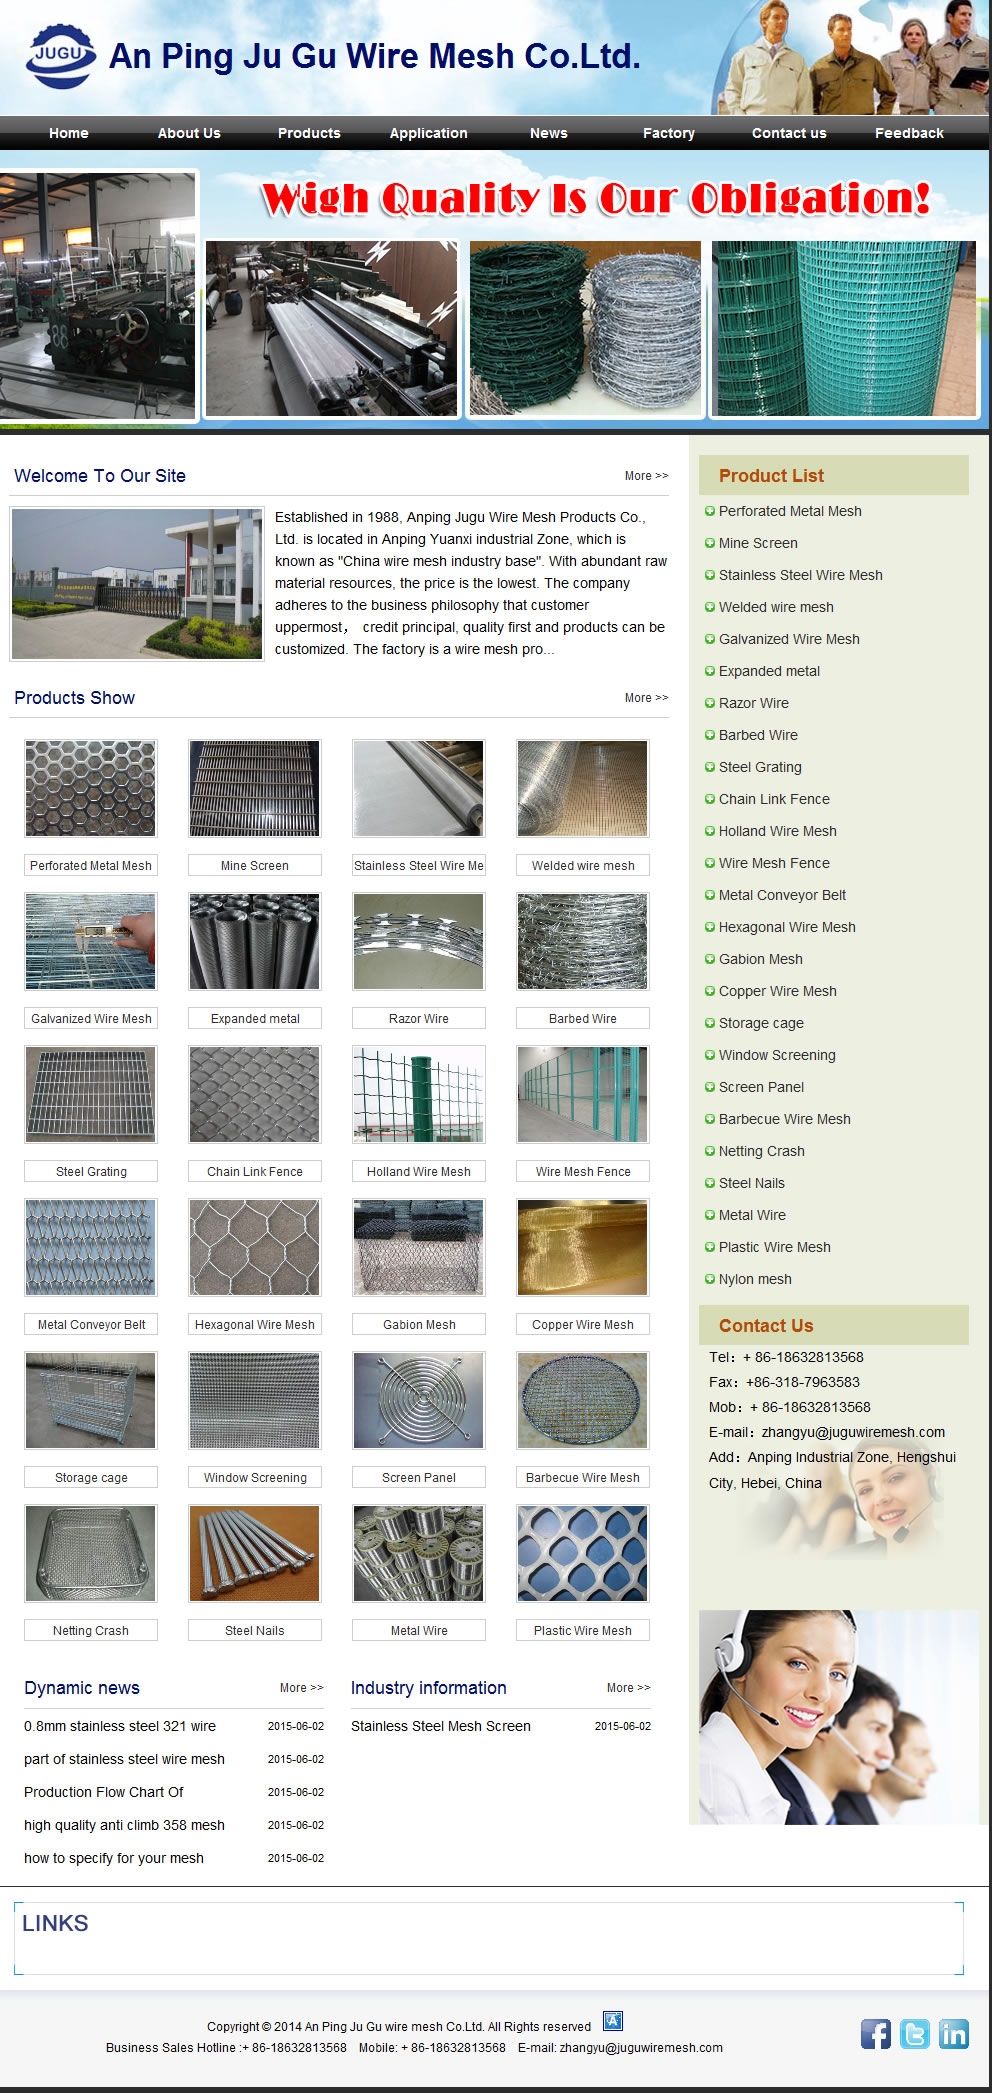 wire mesh stainless steel wire mesh welded wire me.jpg